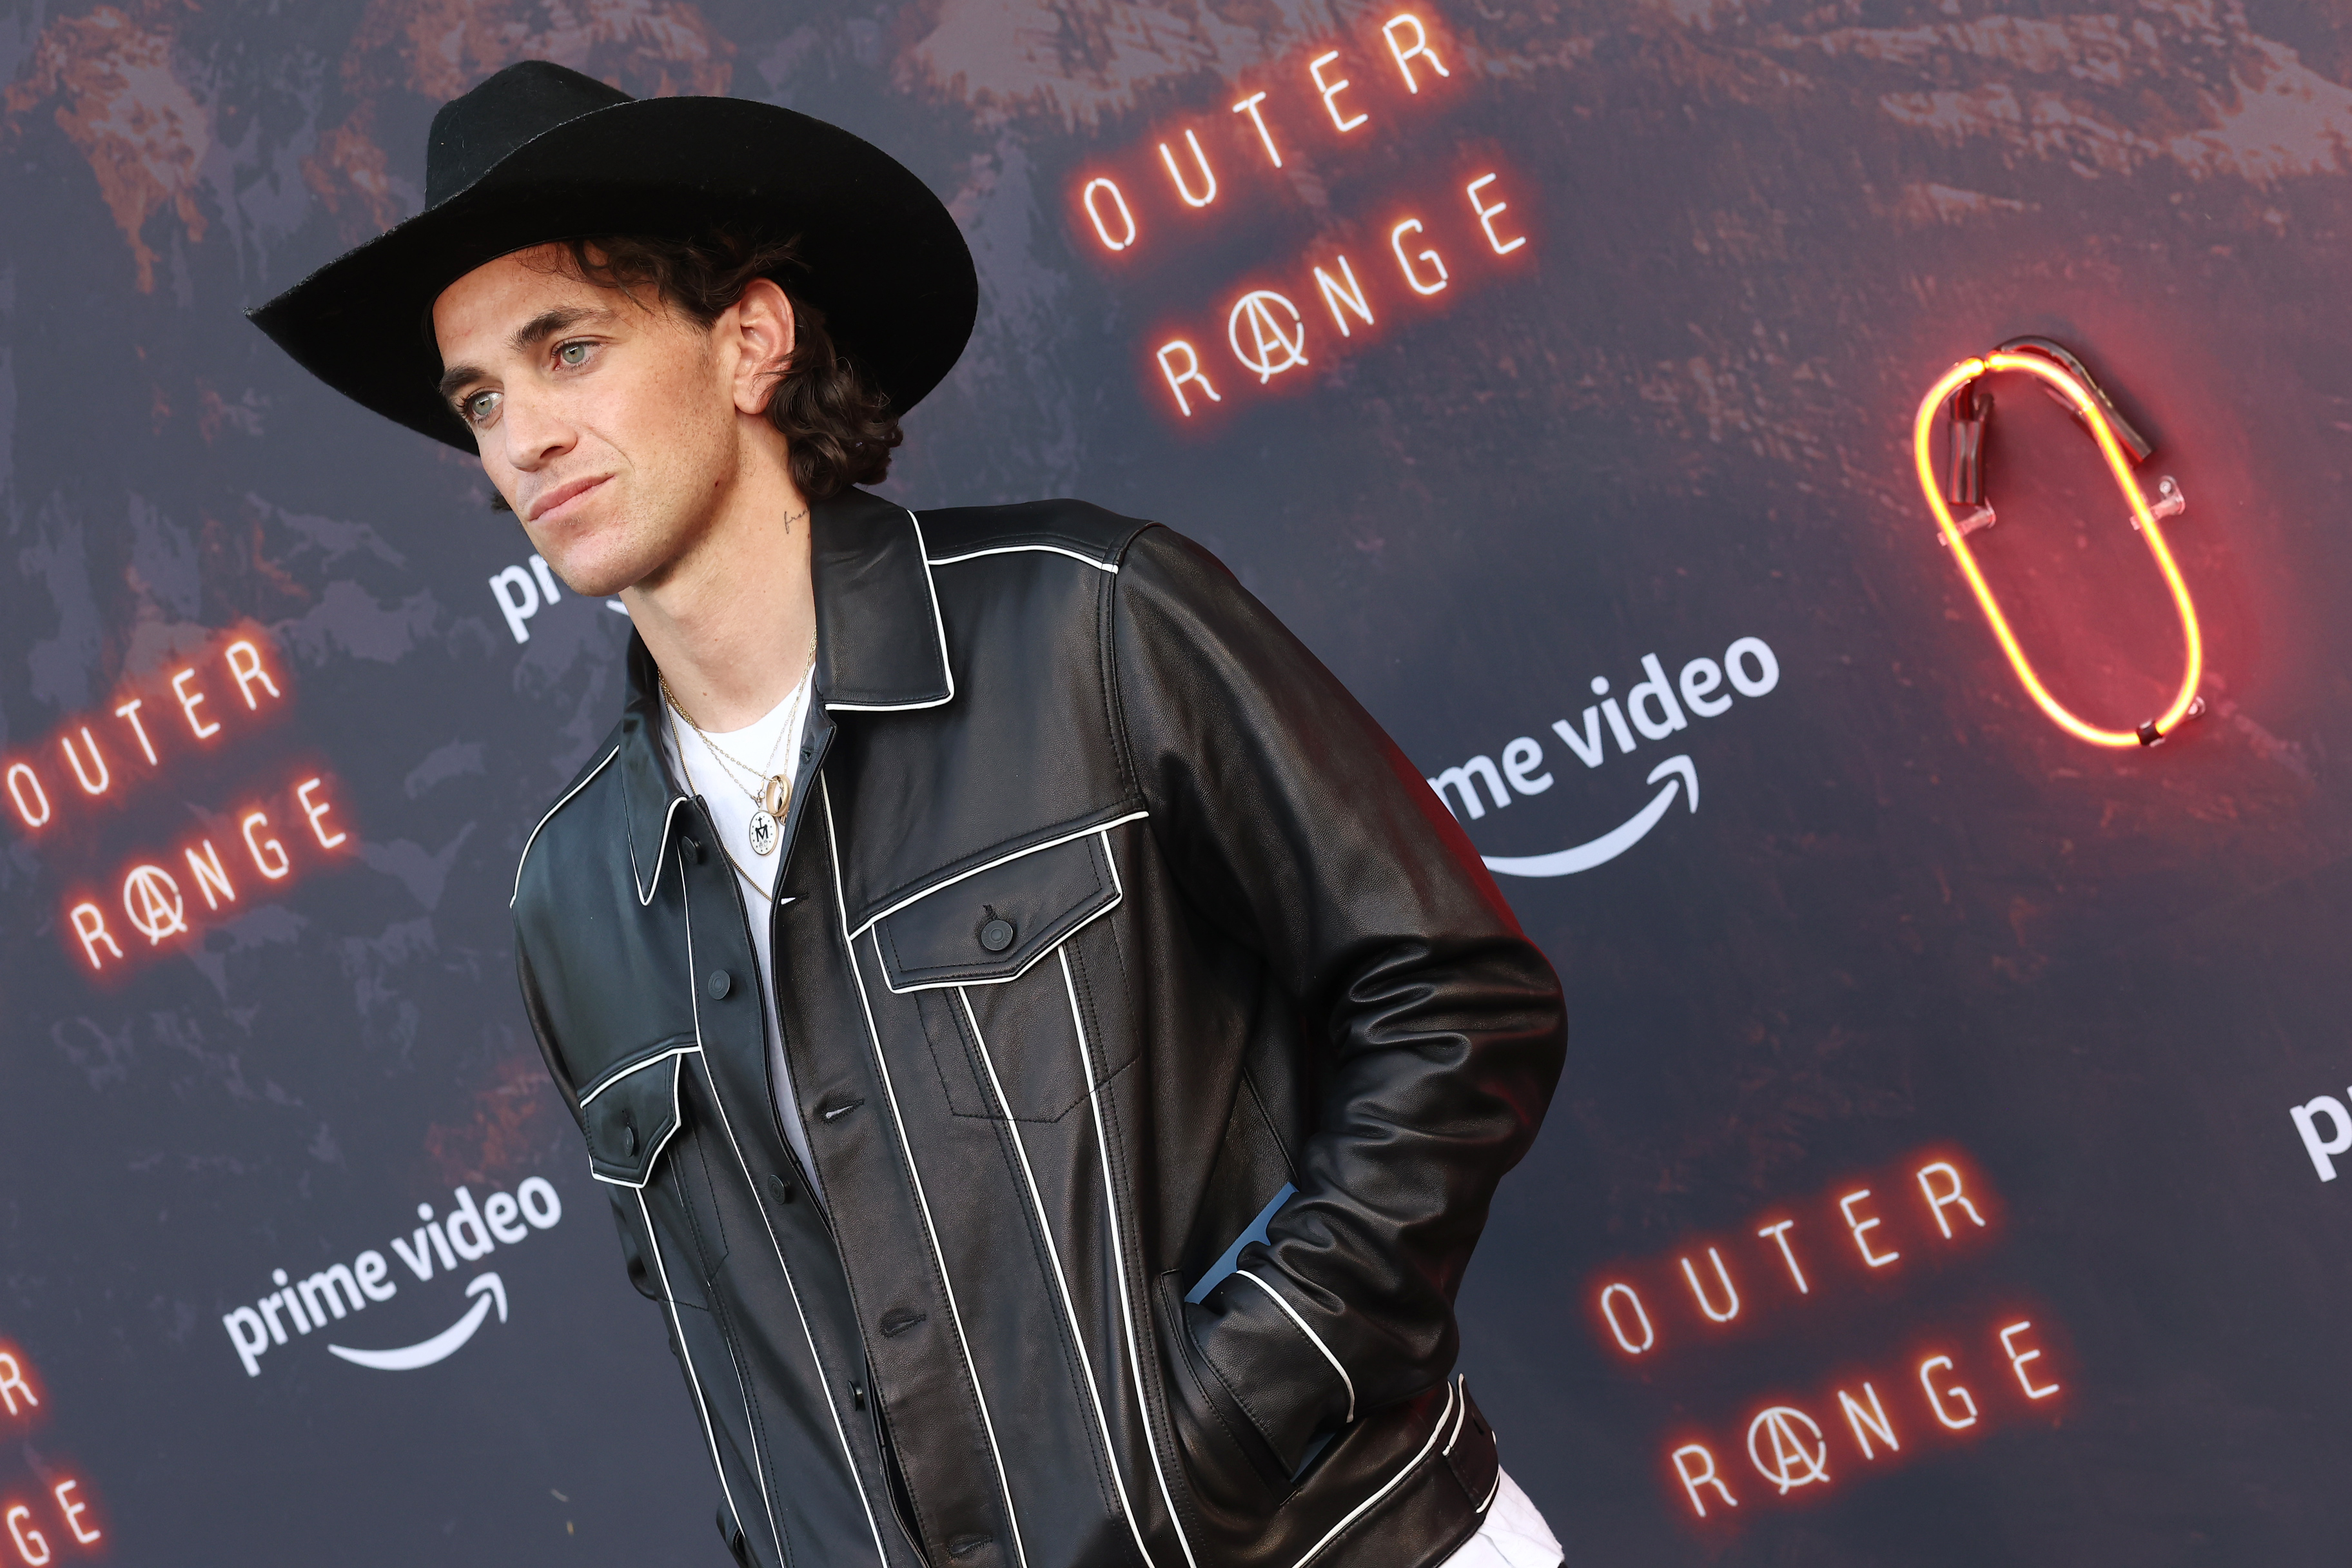 Los Angeles Premiere Of Prime Video's Western "Outer Range"